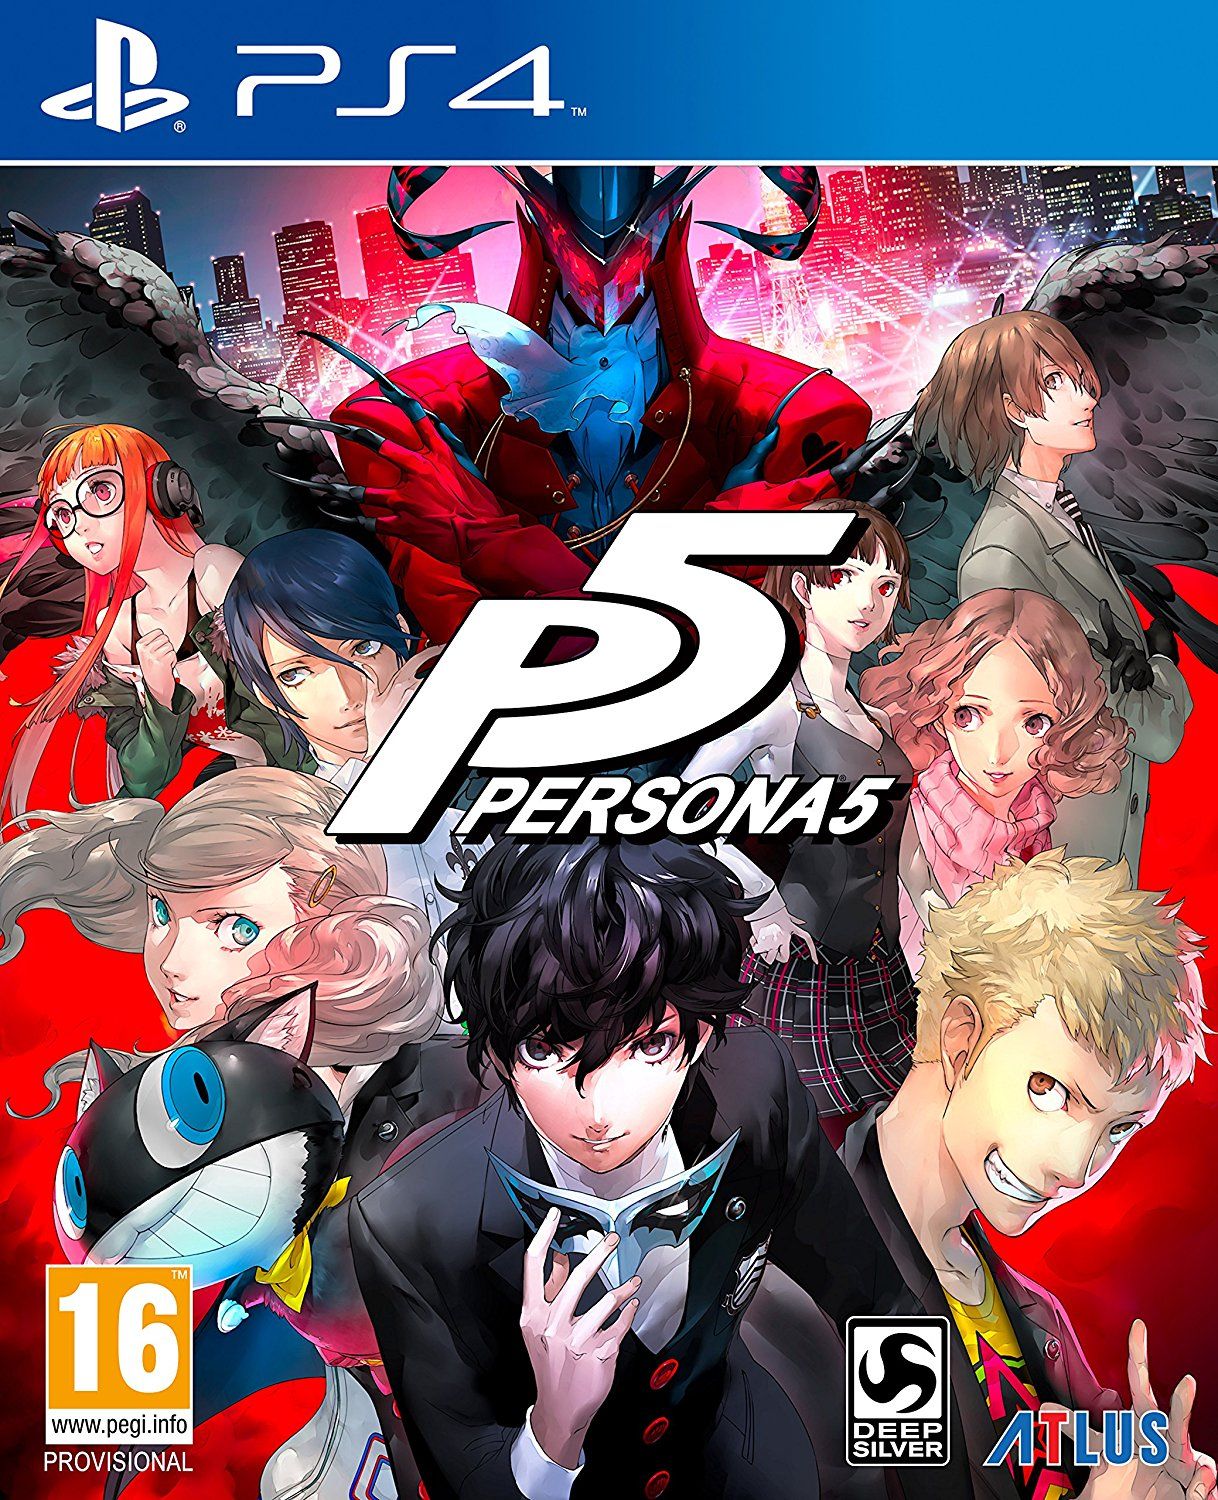 Persona 5 (PS4)(Pwned) | Buy from Pwned Games with confidence. | PS4 ...